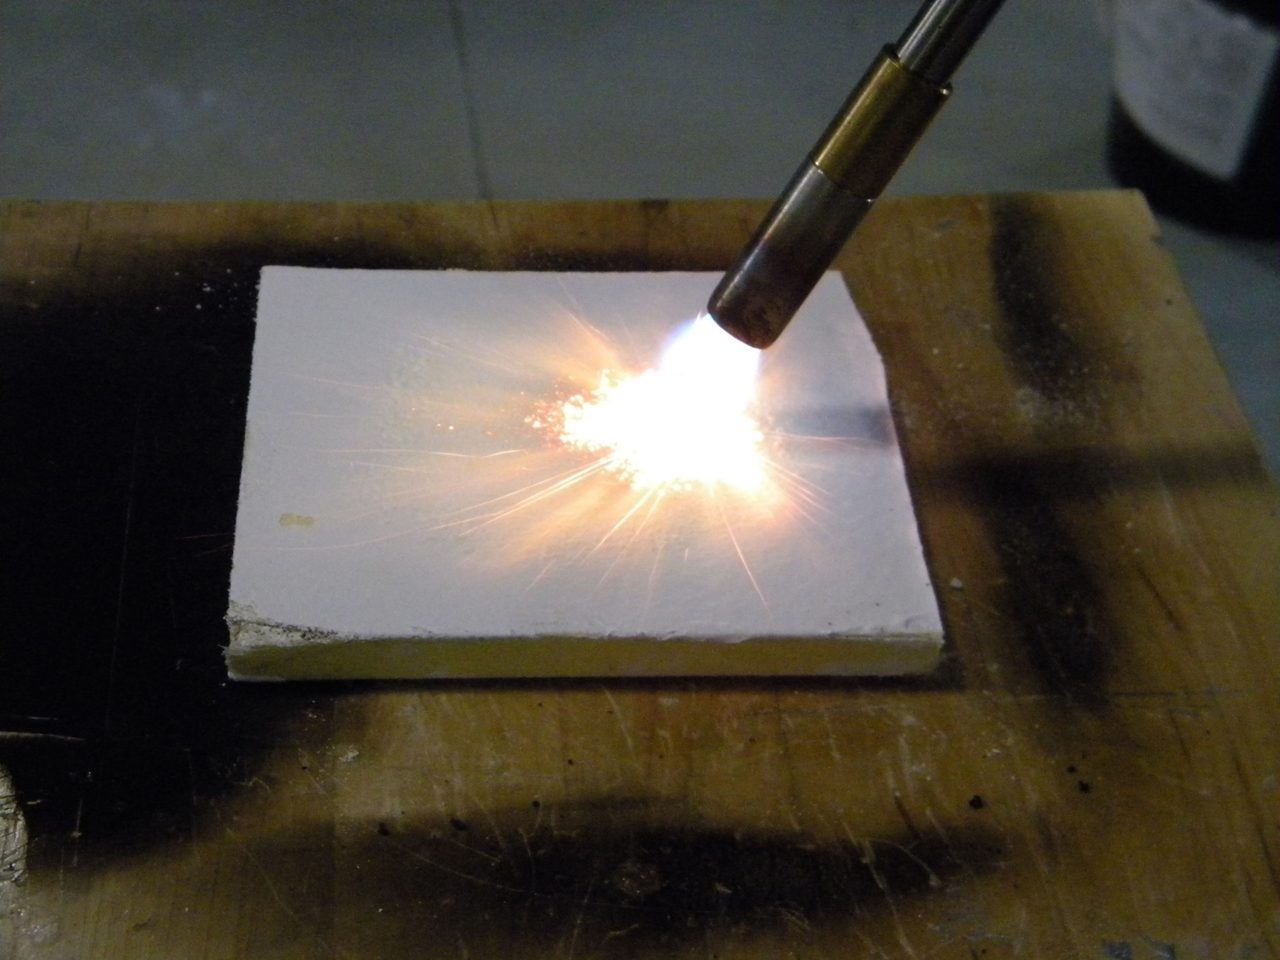 Fire rated silicone sealant being tested by torch 